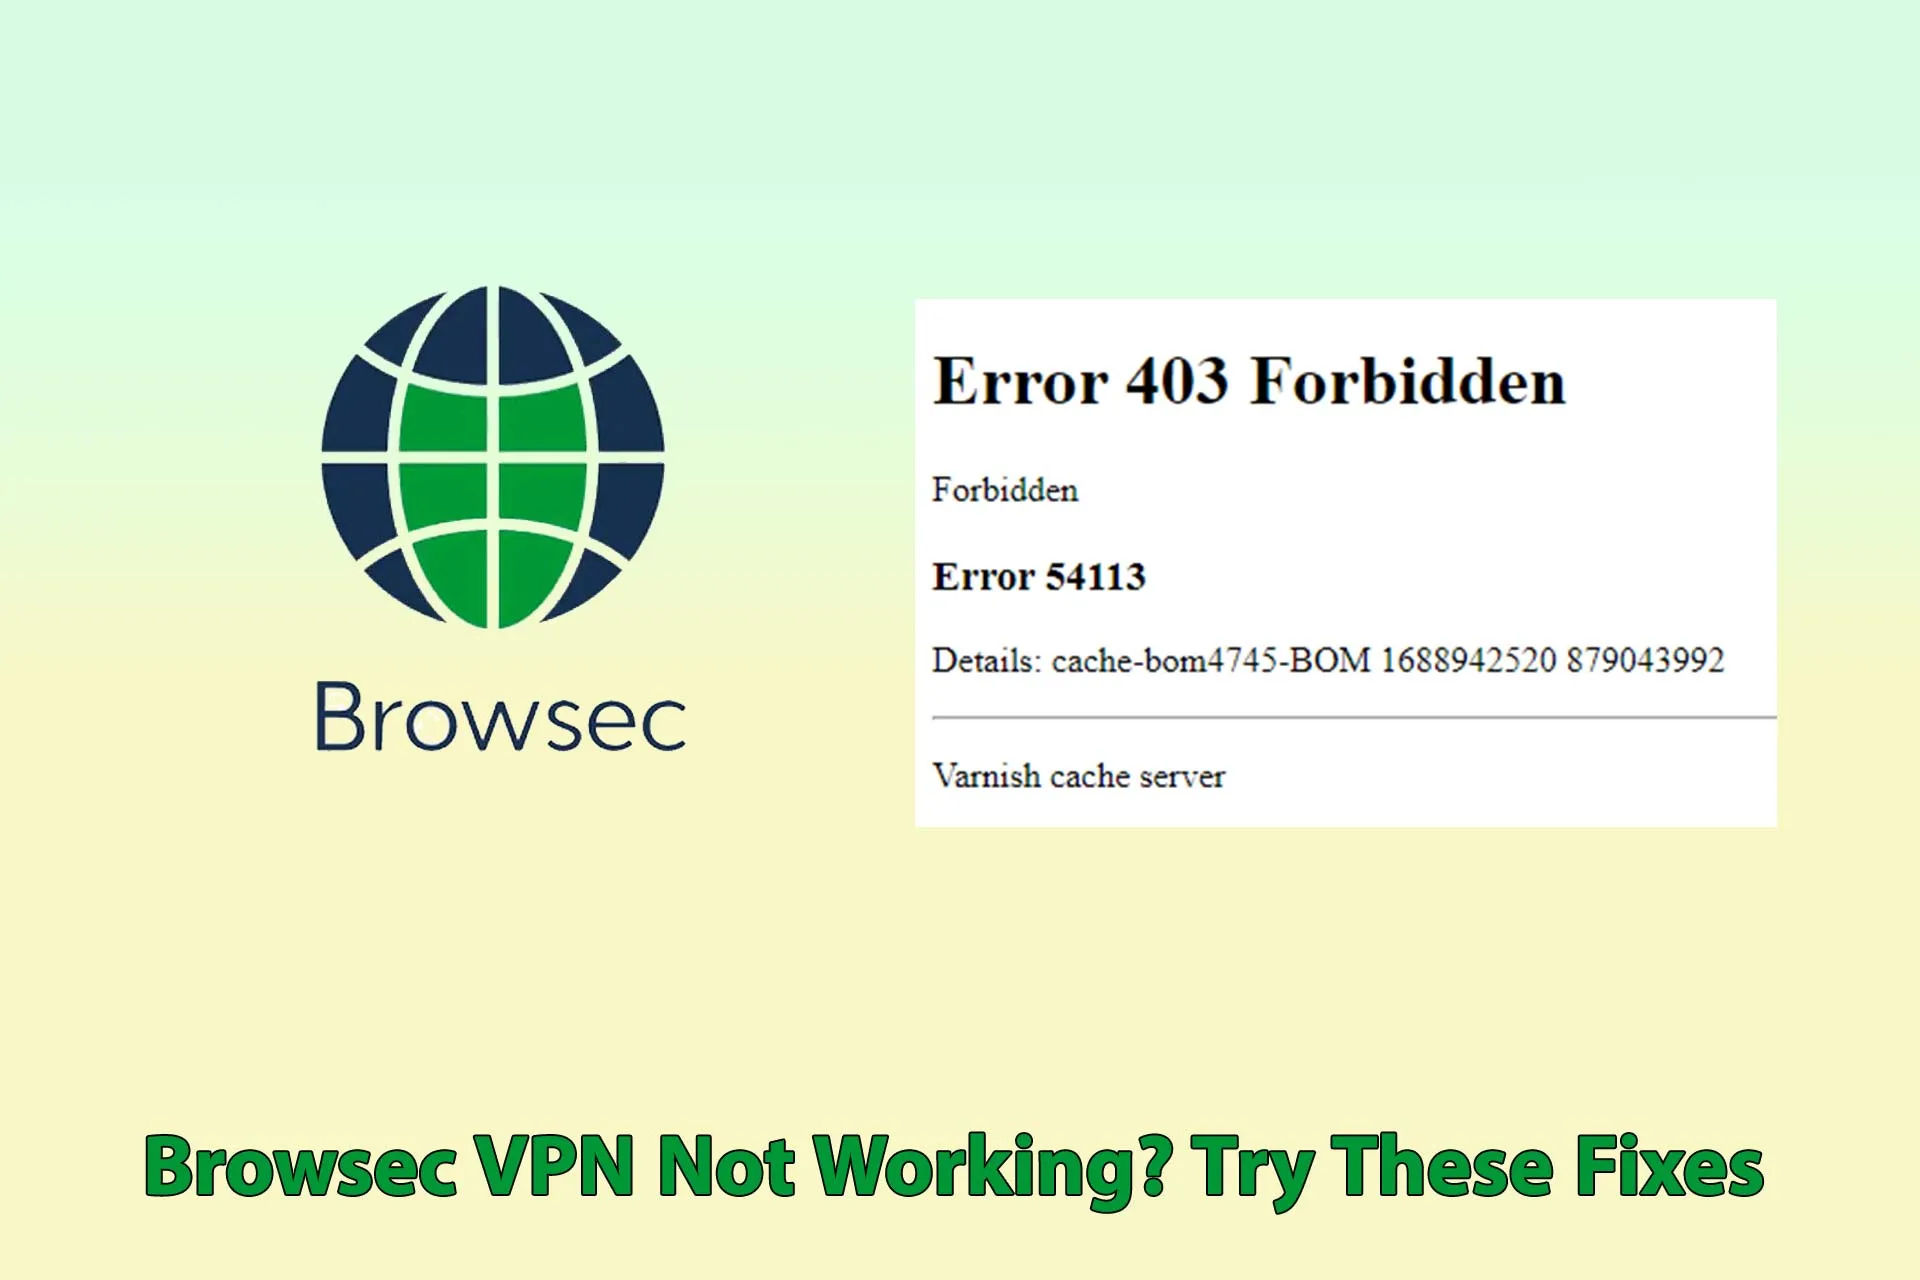 Is Browsec VPN Not Working? Try These Easy Fixes!